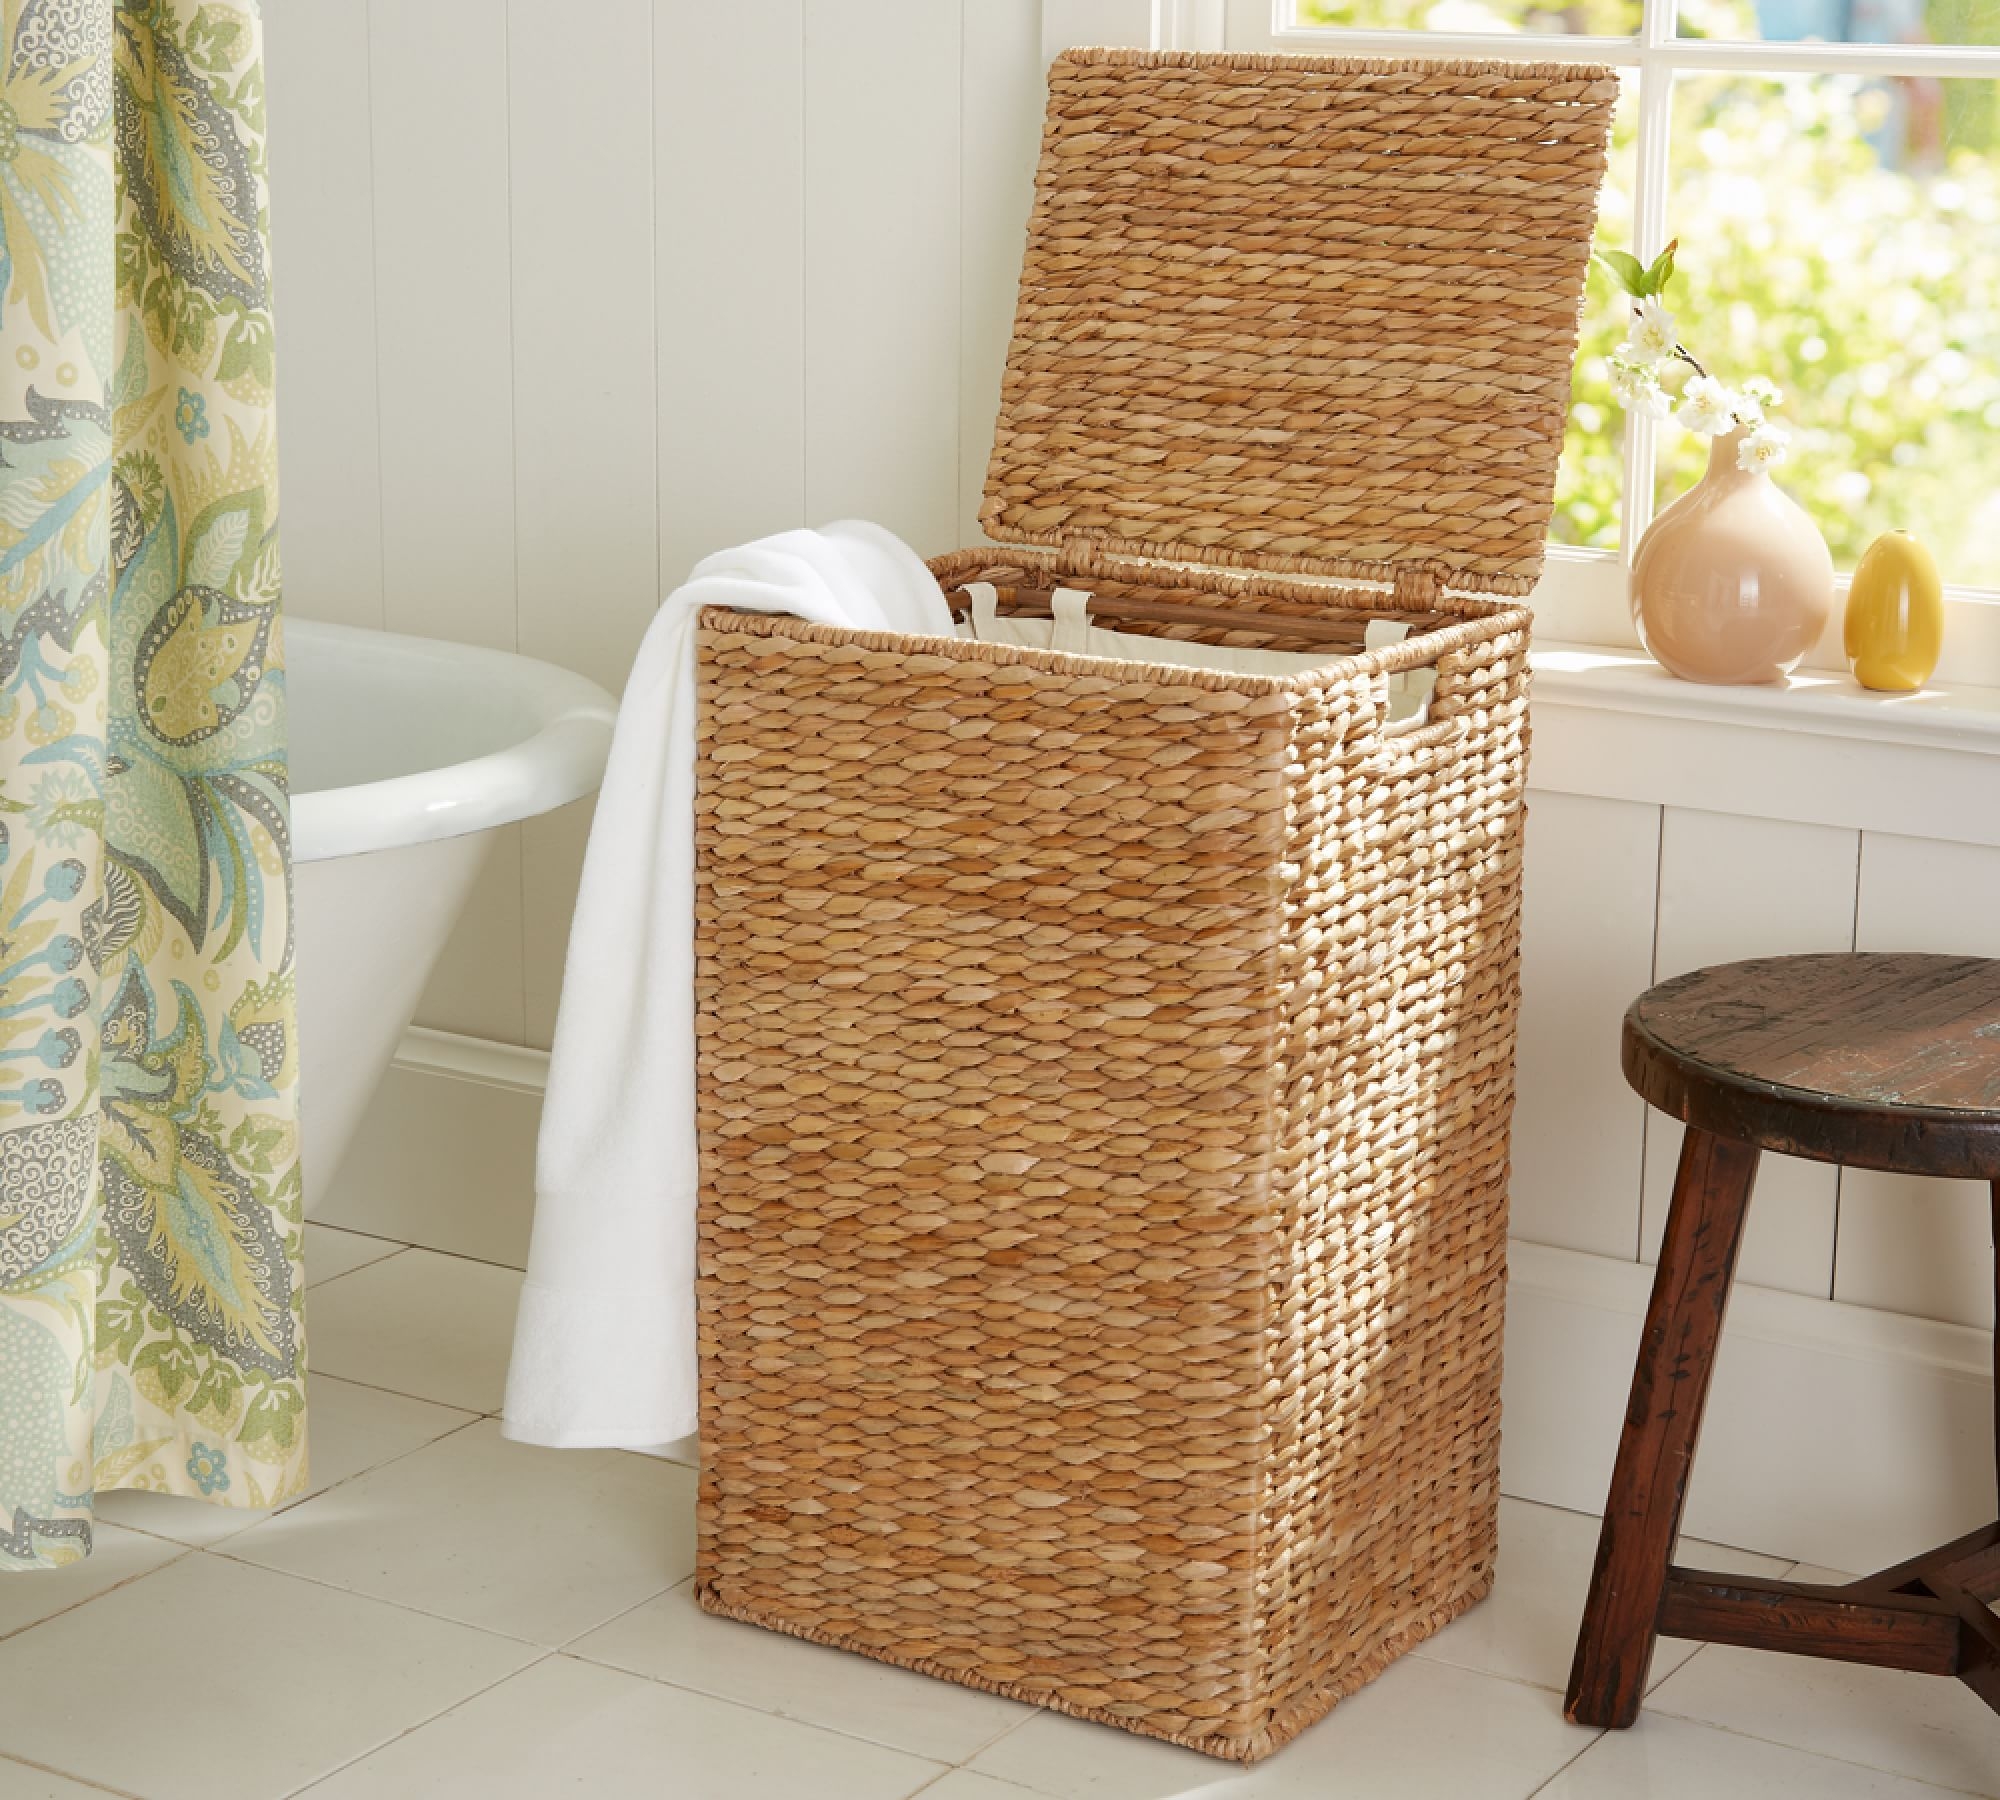 Seagrass Handcrafted Square Hamper, Savannah - Image 0